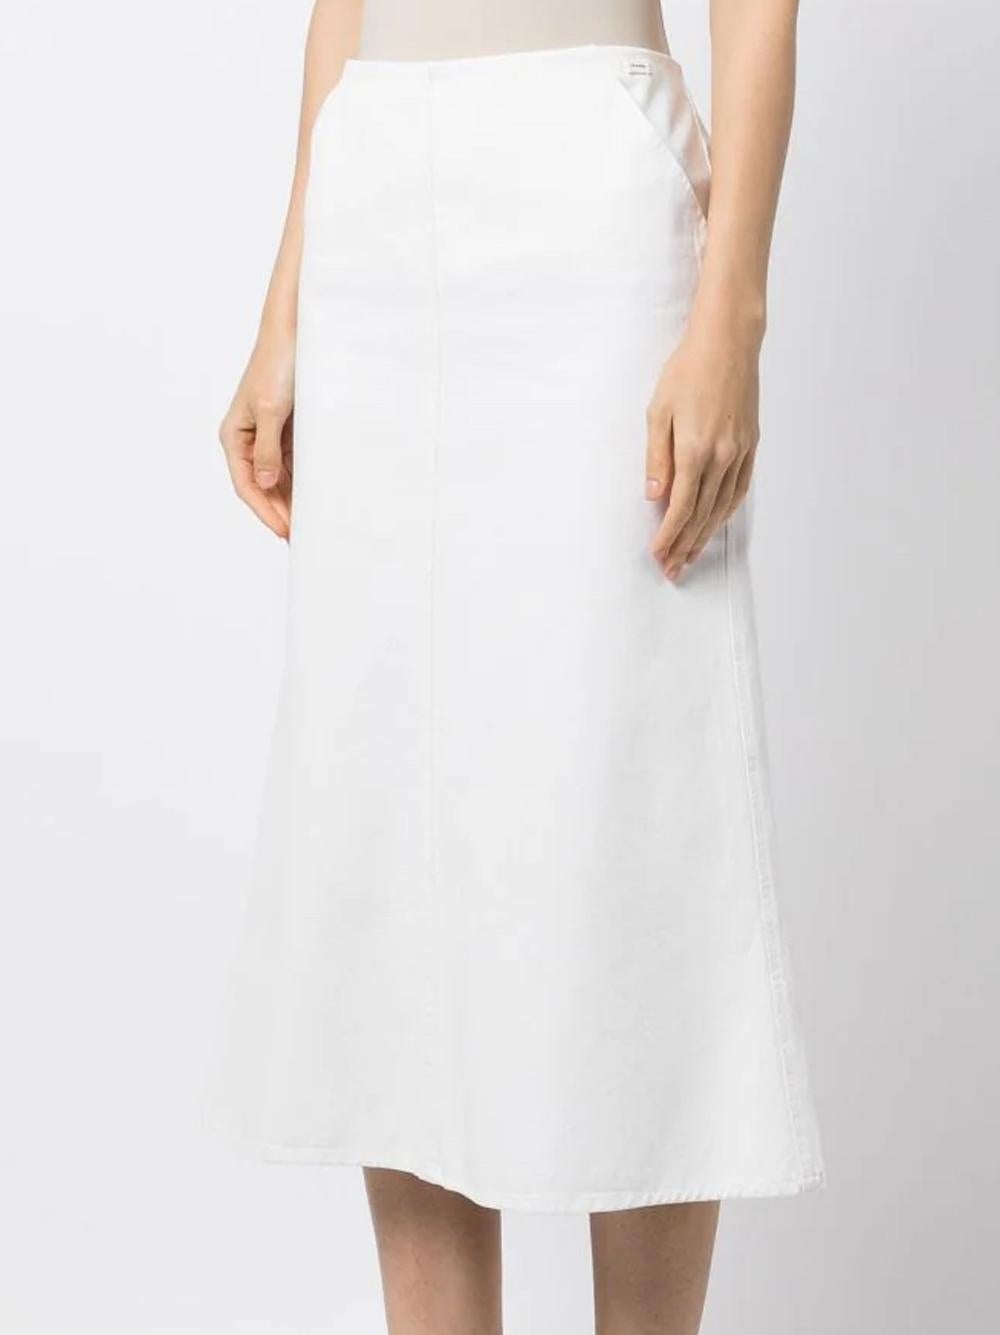 Chanel White Denim Button Long Skirt In Excellent Condition For Sale In London, GB